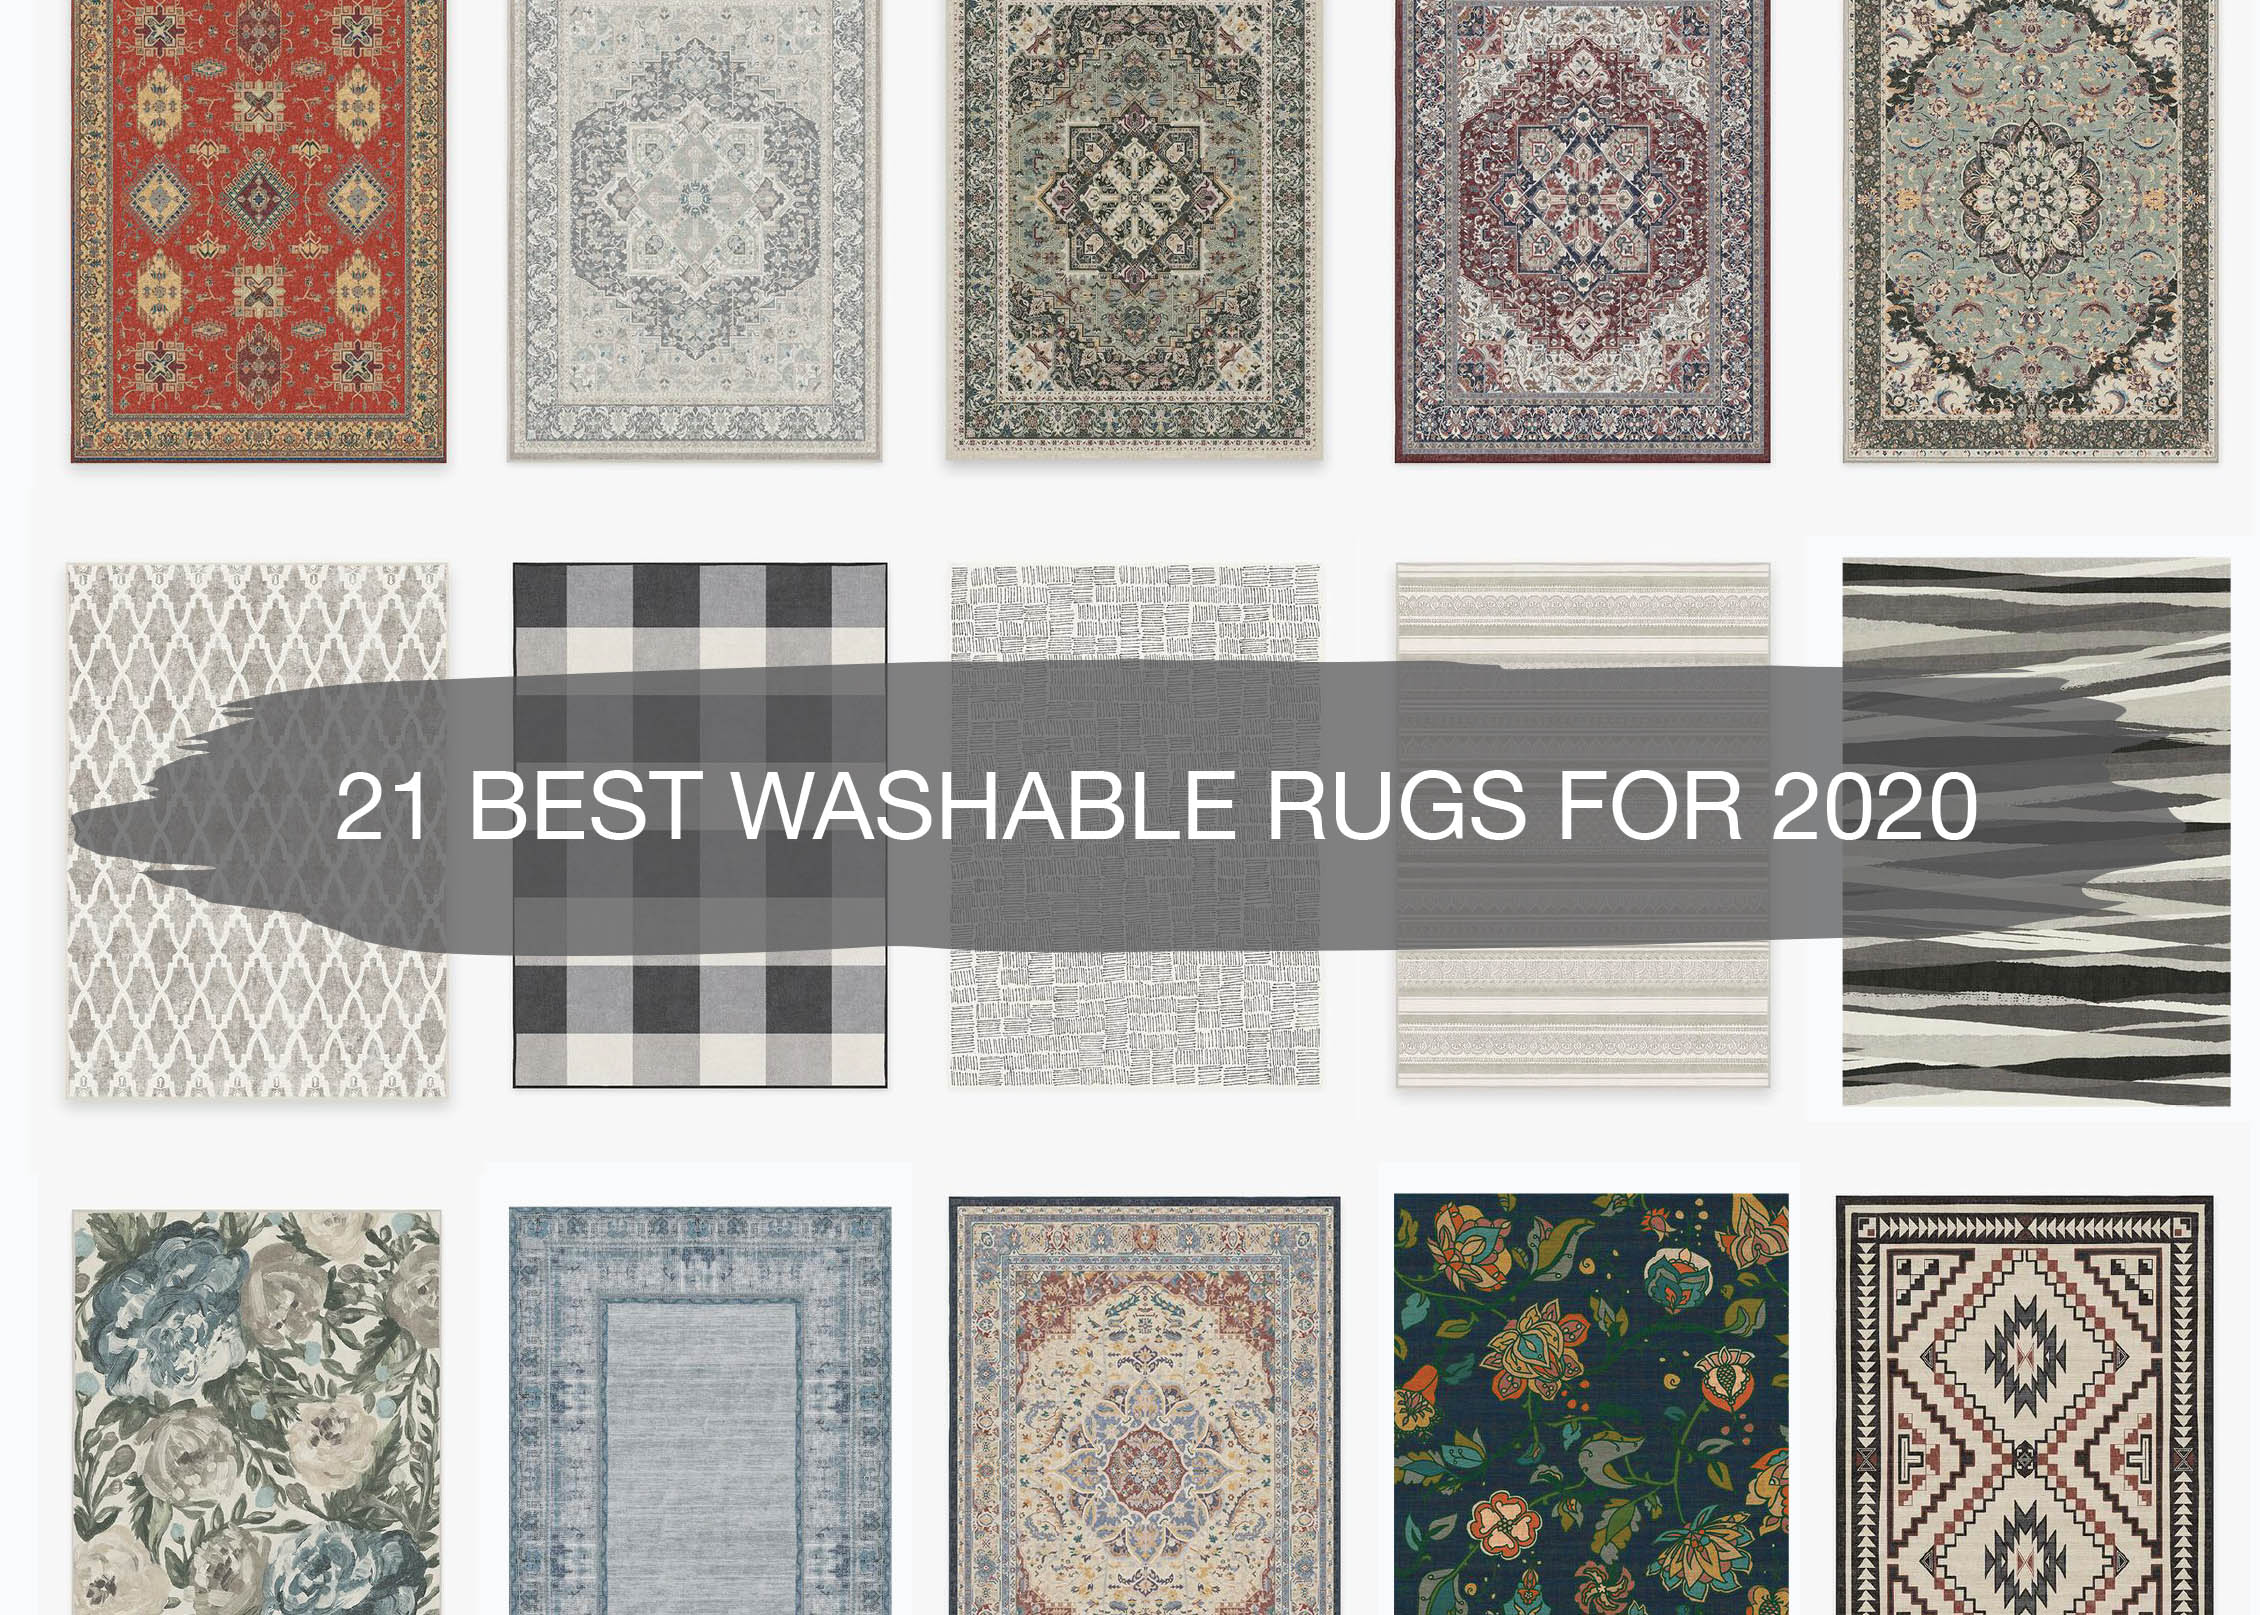 21 Best Washable Rugs for 2020 1